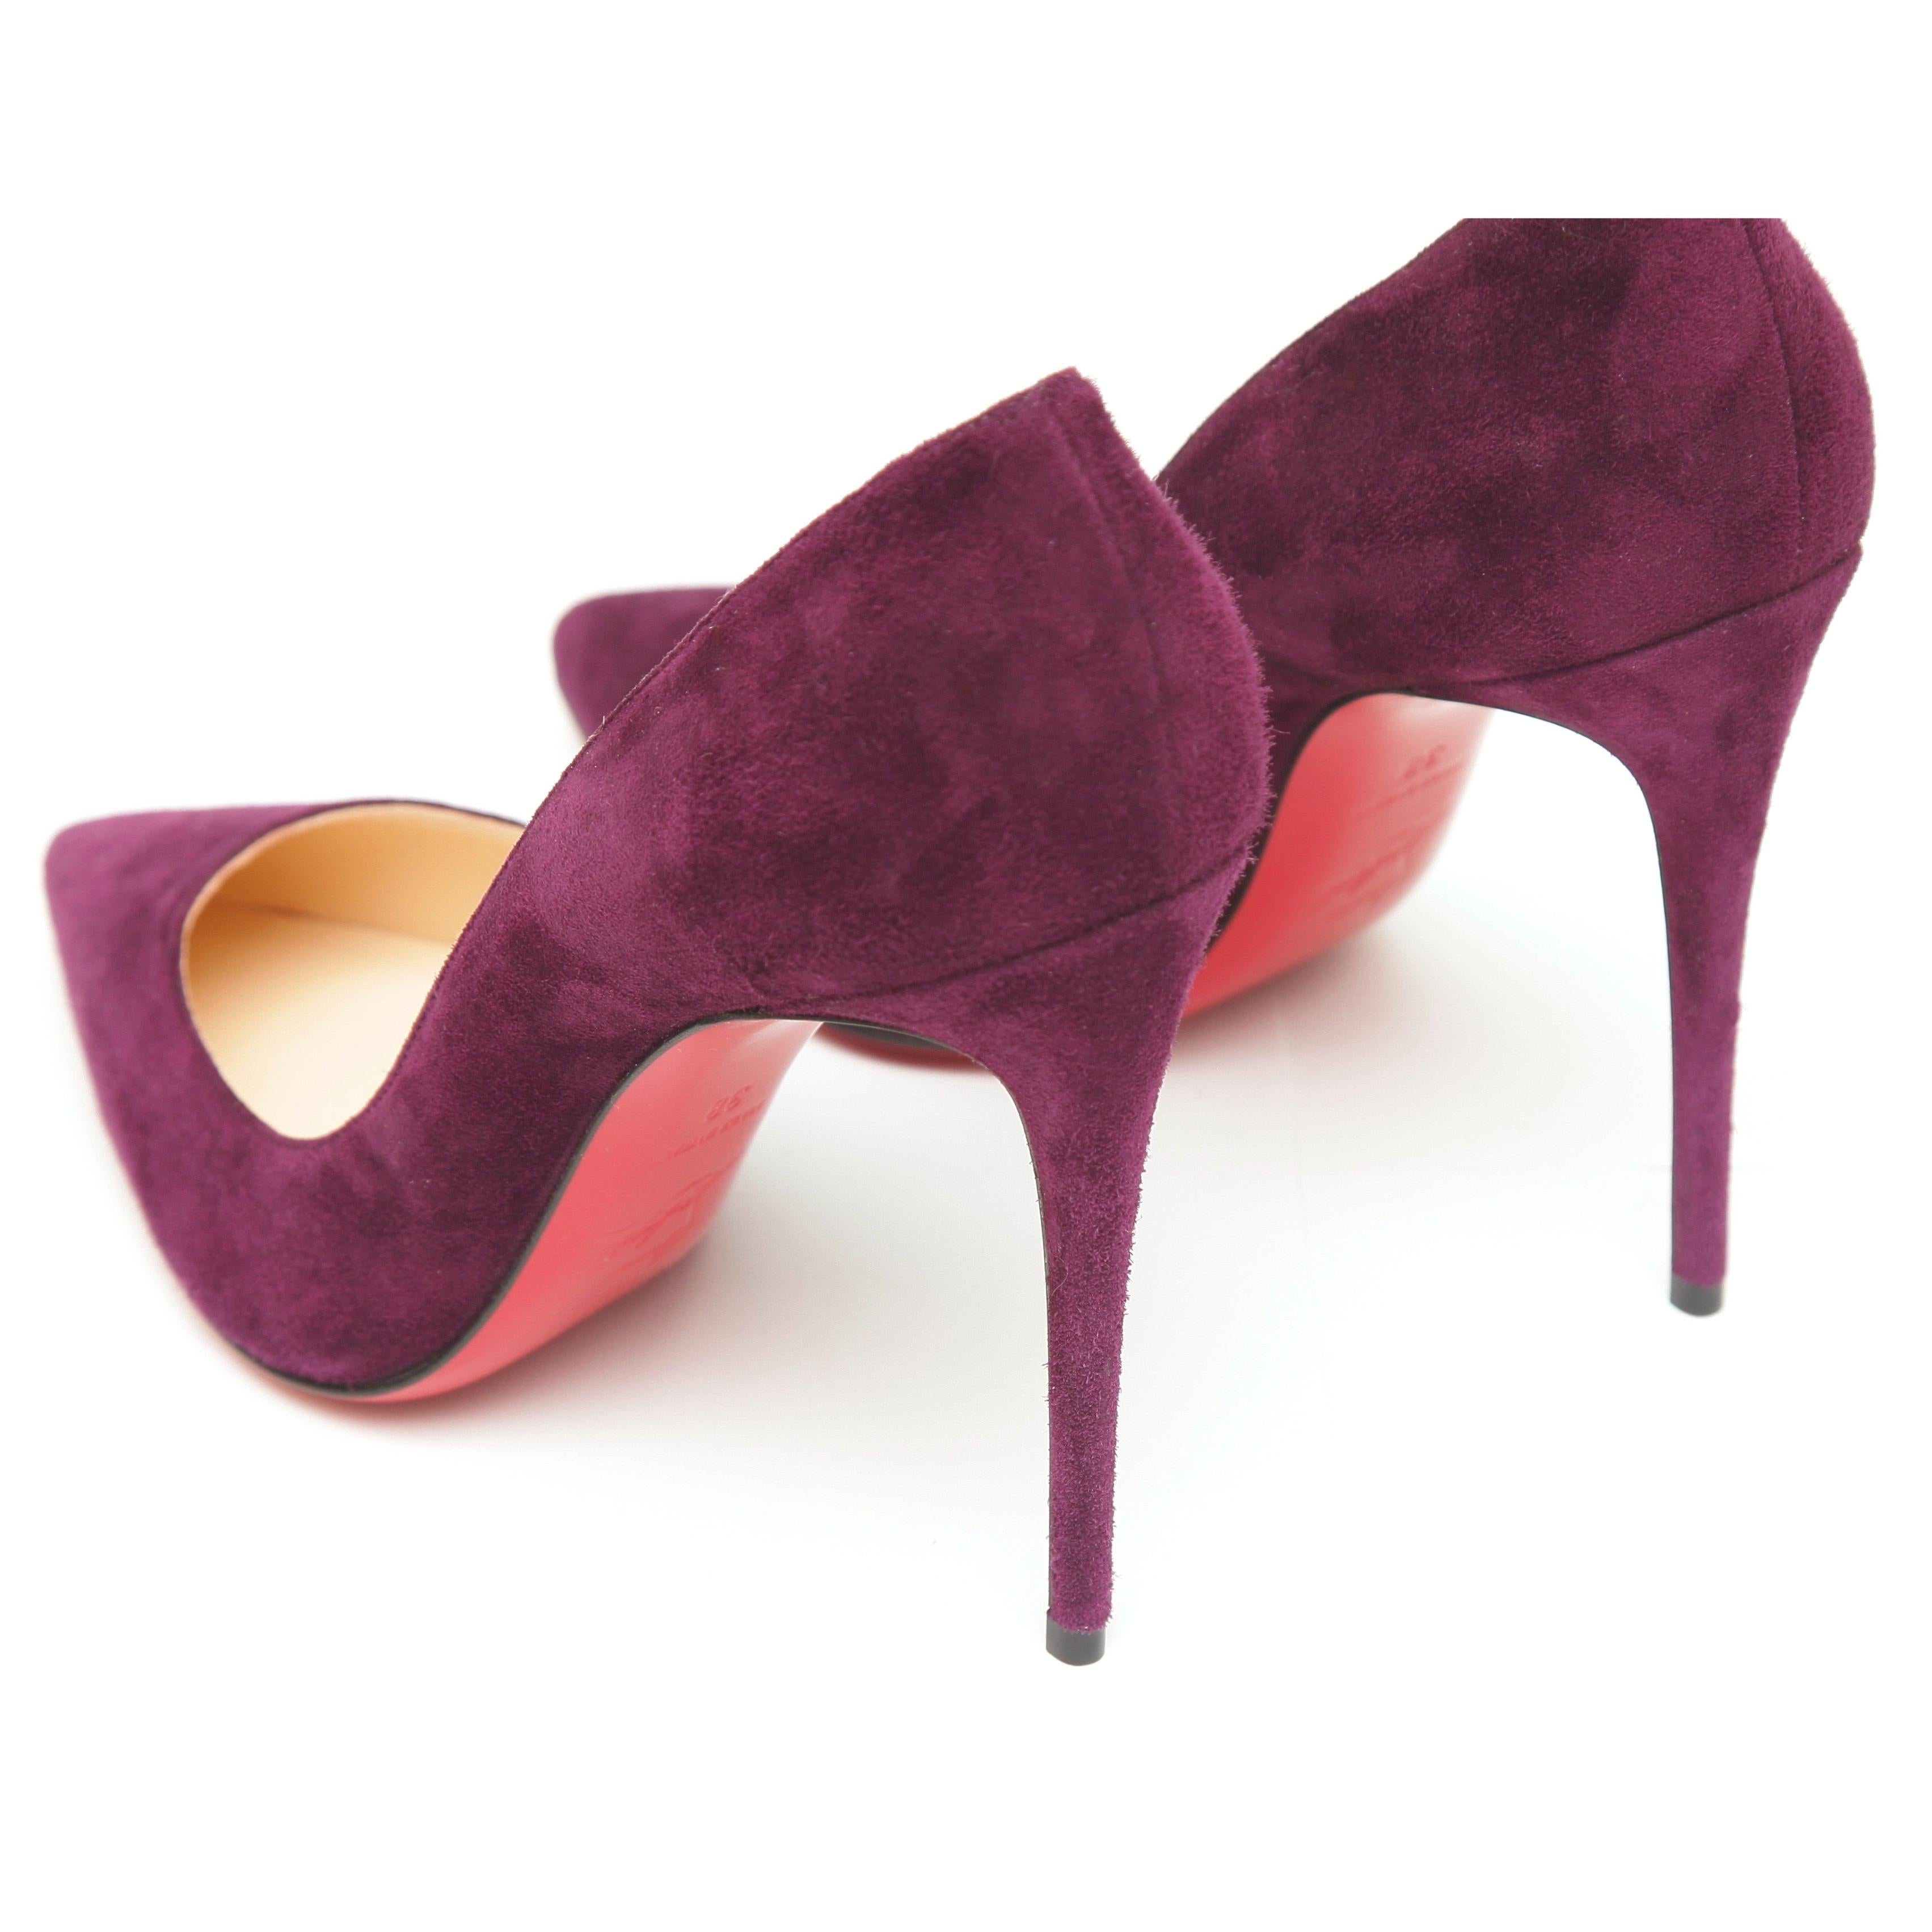 CHRISTIAN LOUBOUTIN Purple Suede Pump SO KATE 100 Pointed Toe 38 NEW 1